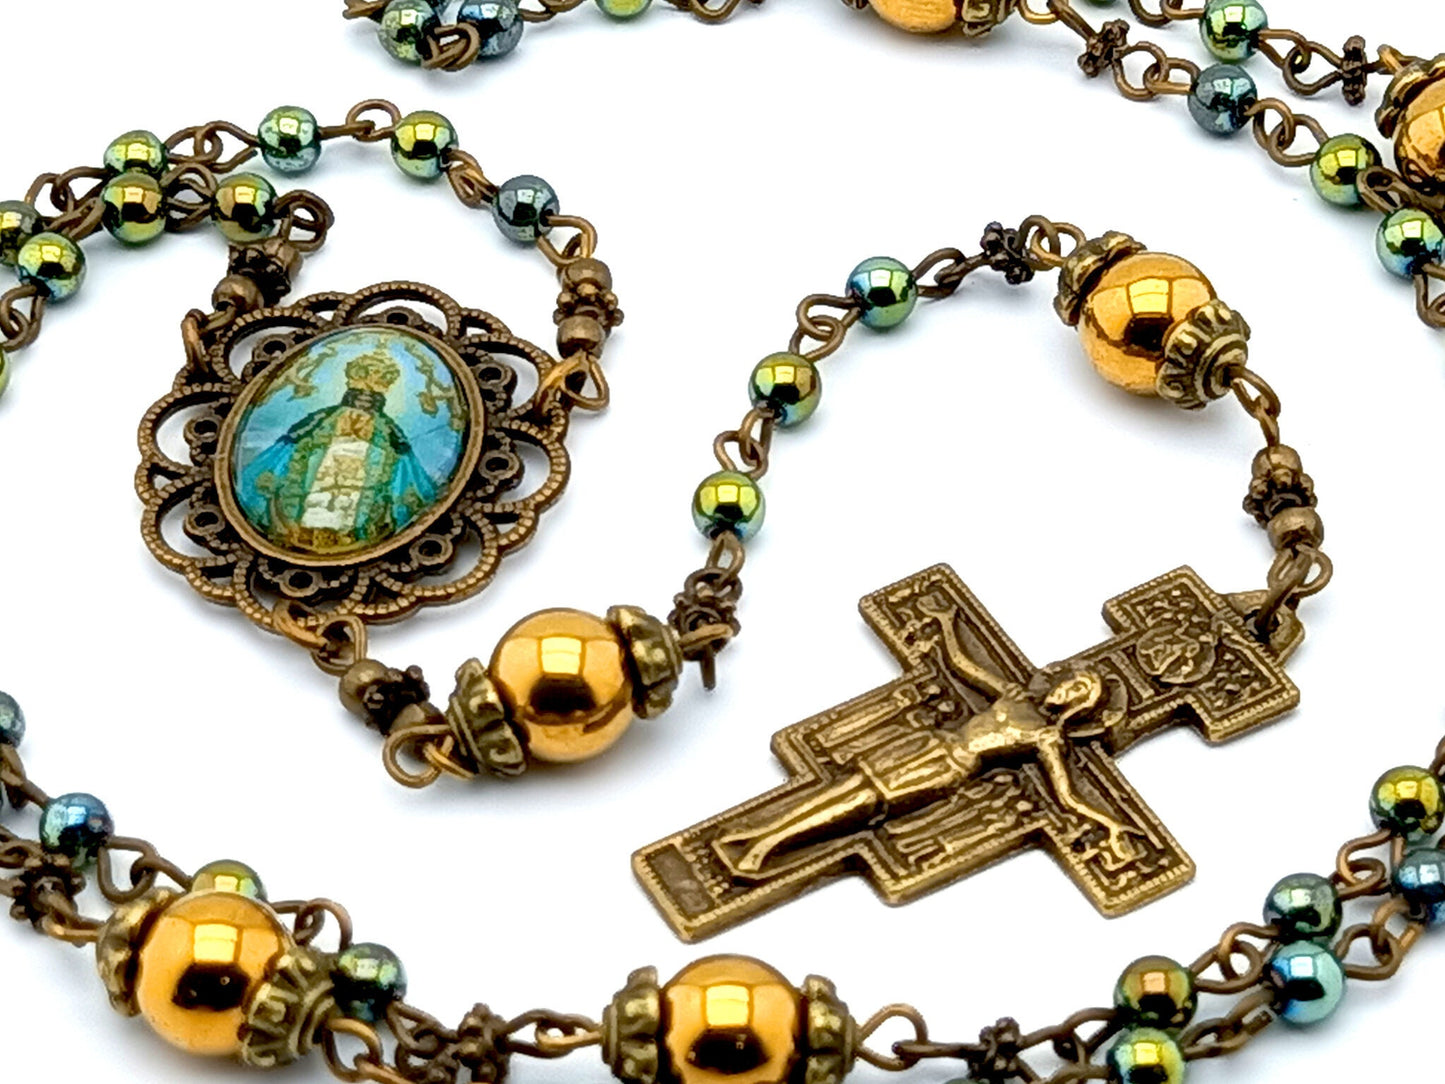 Our Lady of Charity unique rosary beads with blue gree and gold gemstone beads, bronze Saint Francis of Assisi crucifix and picture centre medal.